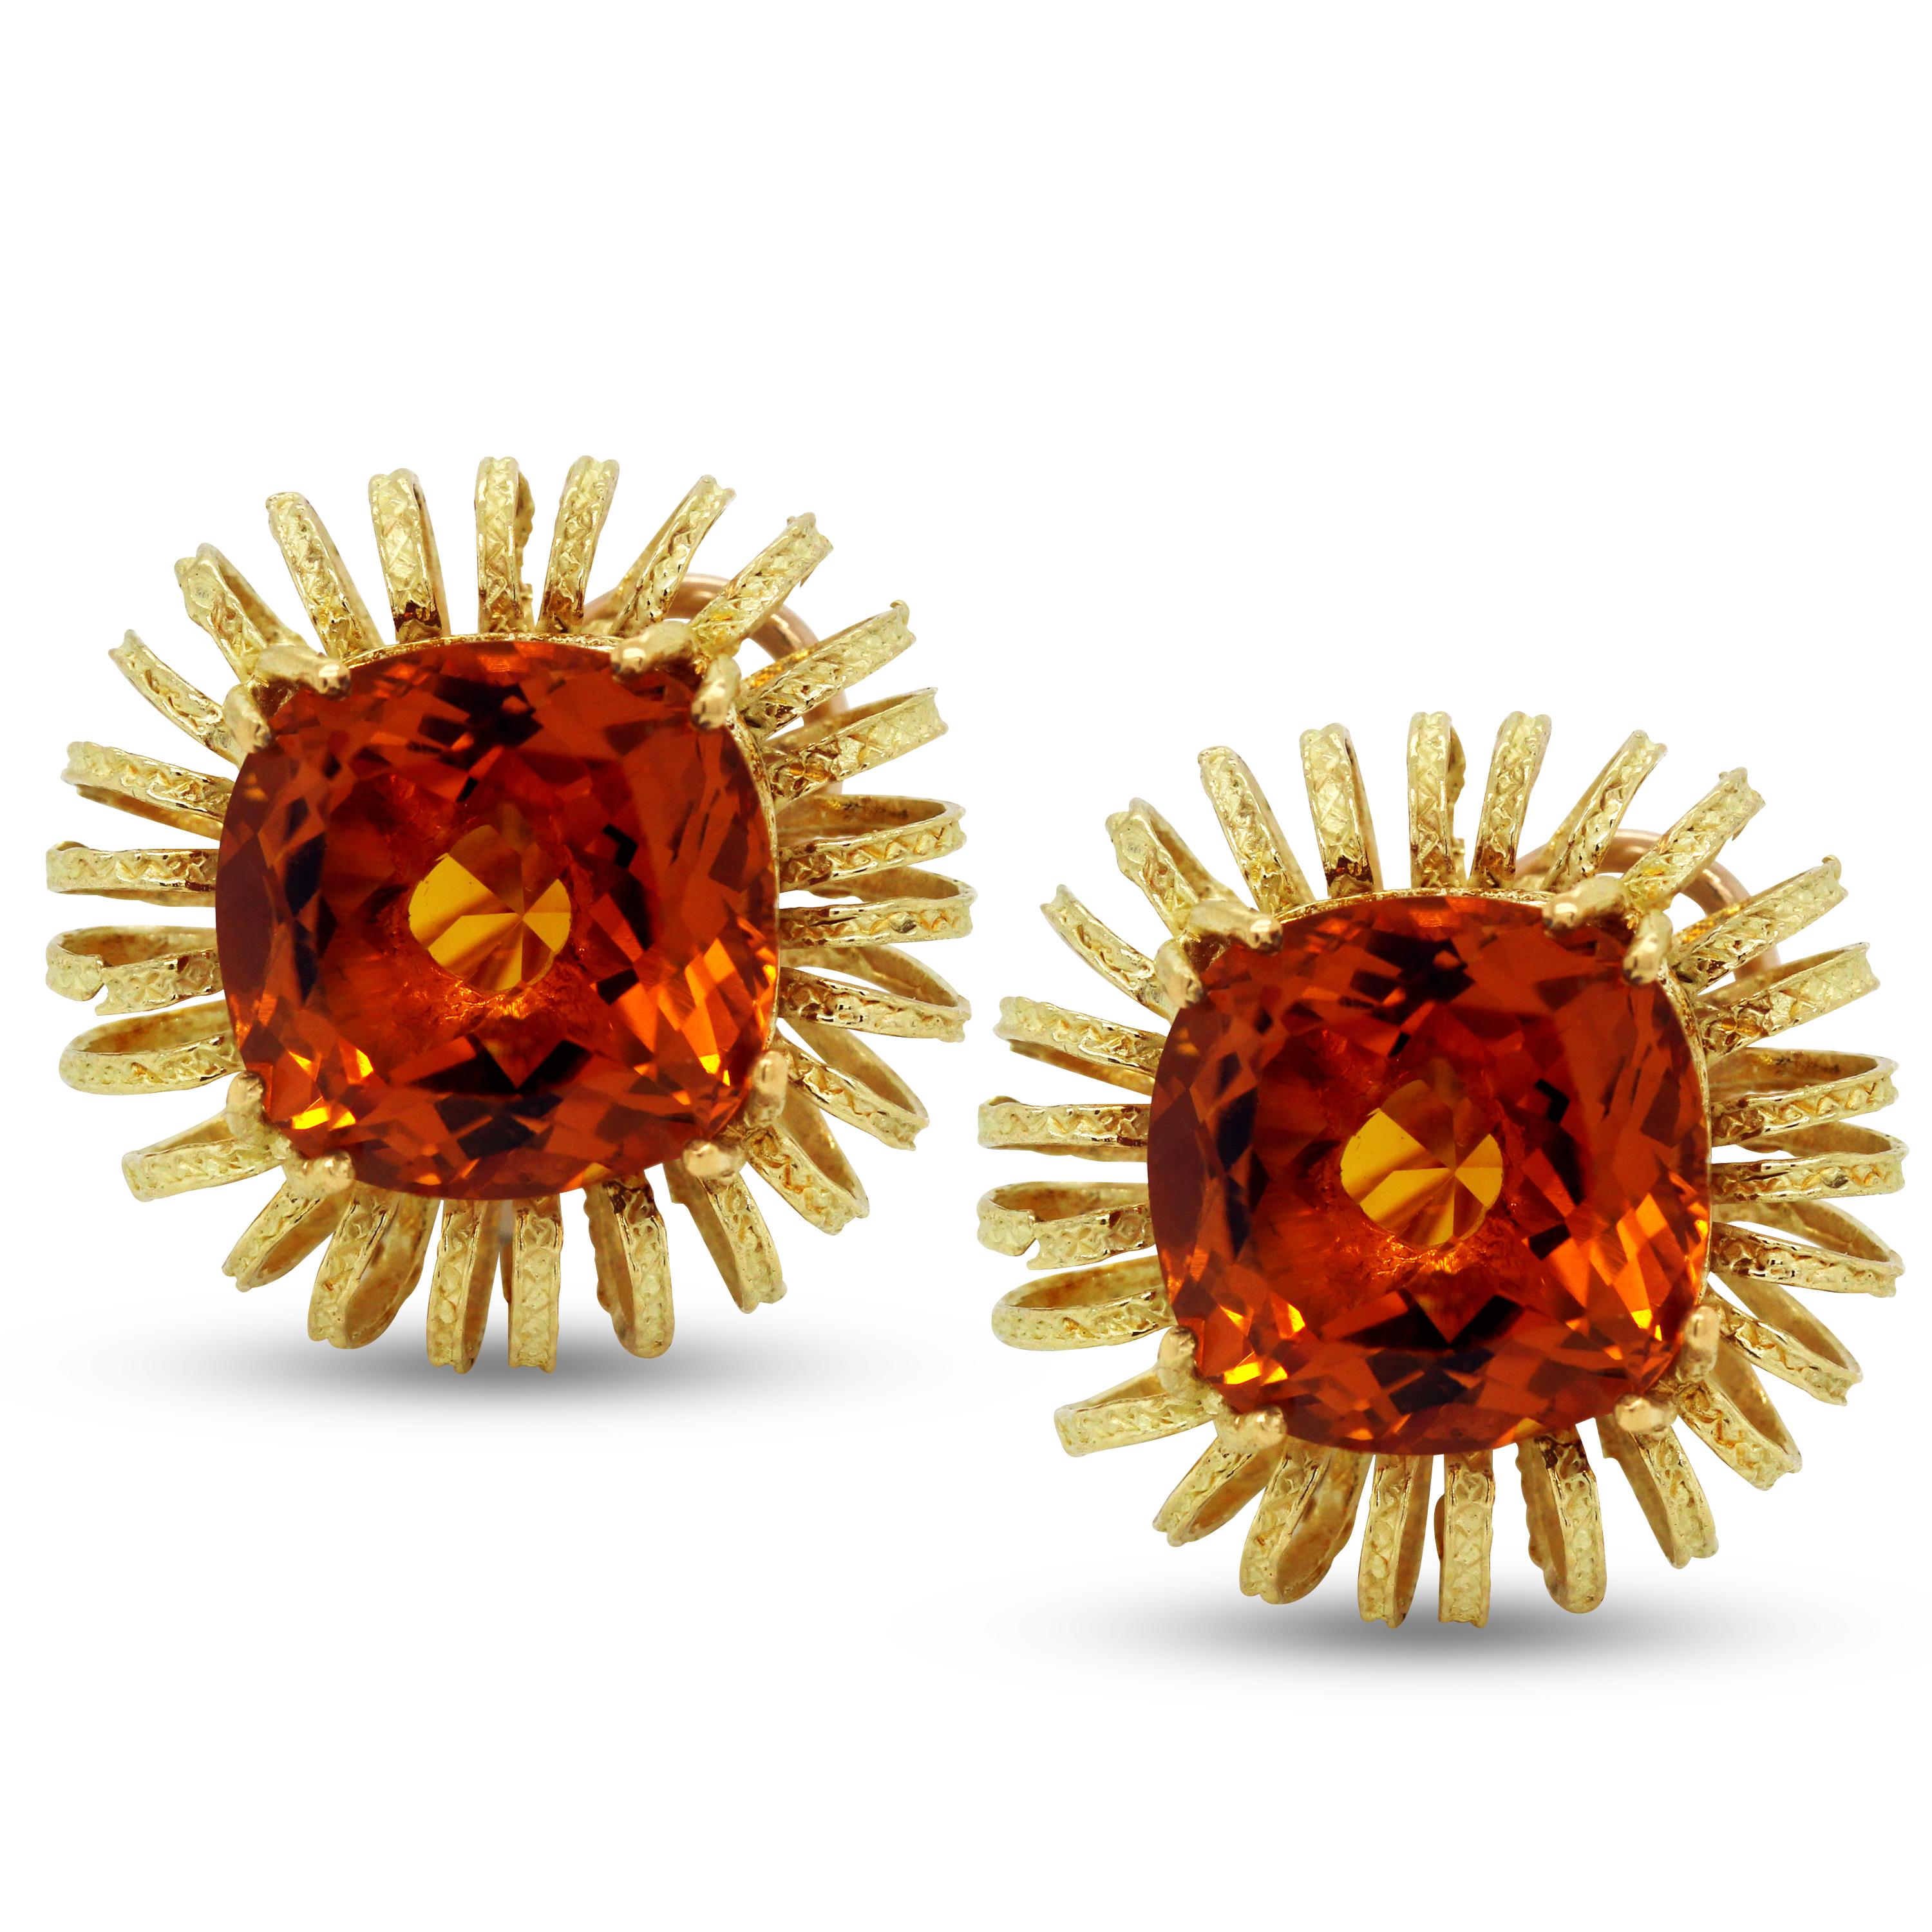 18 Karat Yellow Gold Starburst Floral Stud Earrings with Citrine Centers In Excellent Condition For Sale In Boca Raton, FL